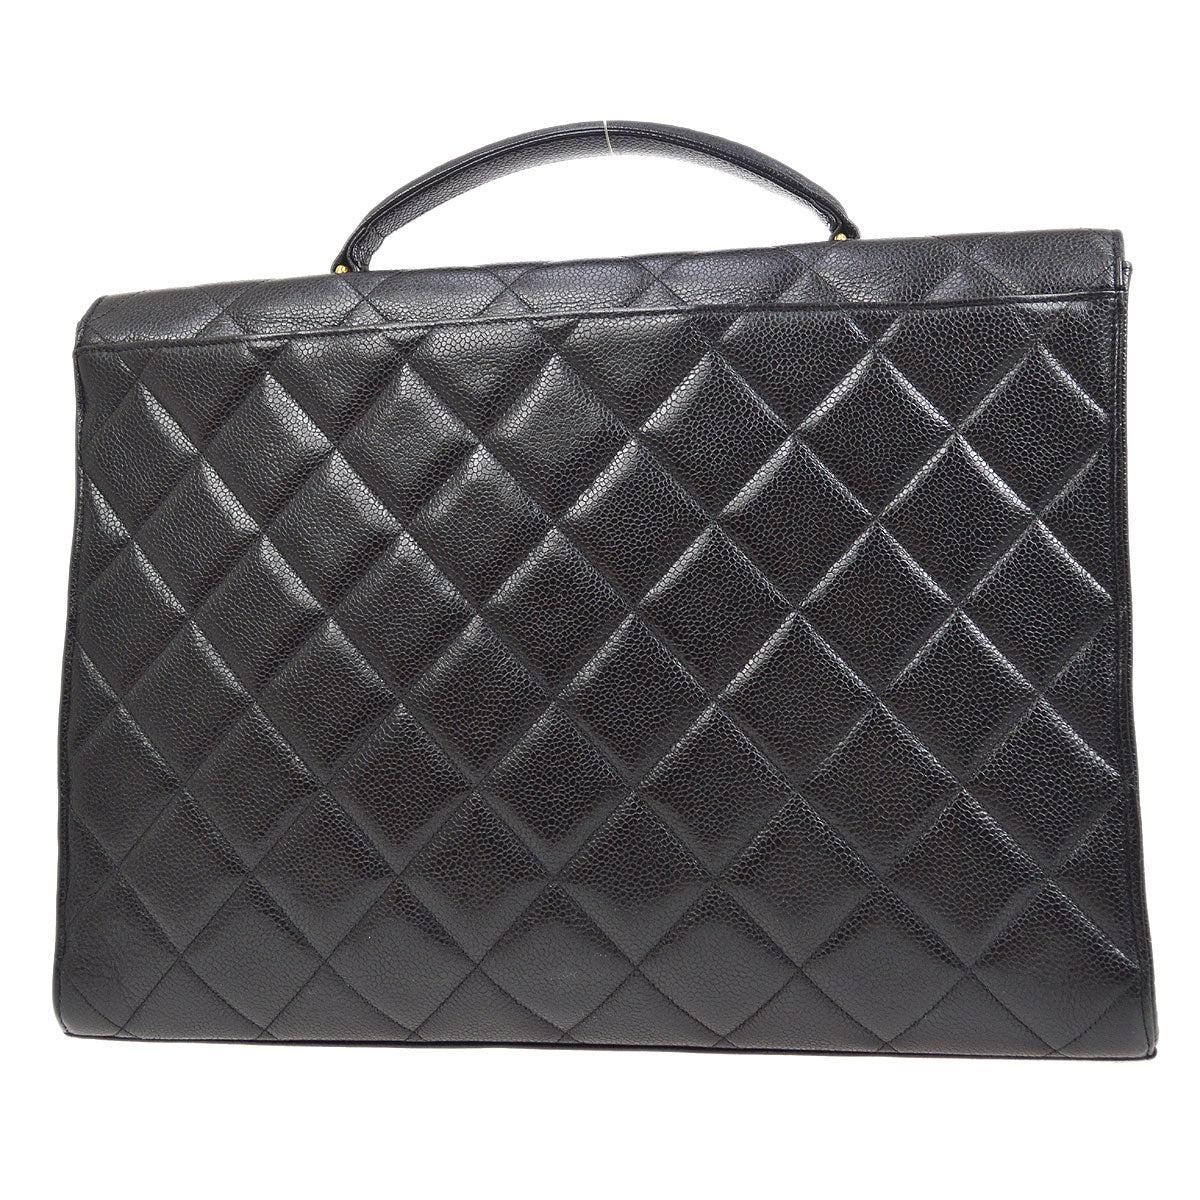 CHANEL Black Caviar Leather Gold CC Briefcase Travel Business Bag In Good Condition For Sale In Chicago, IL